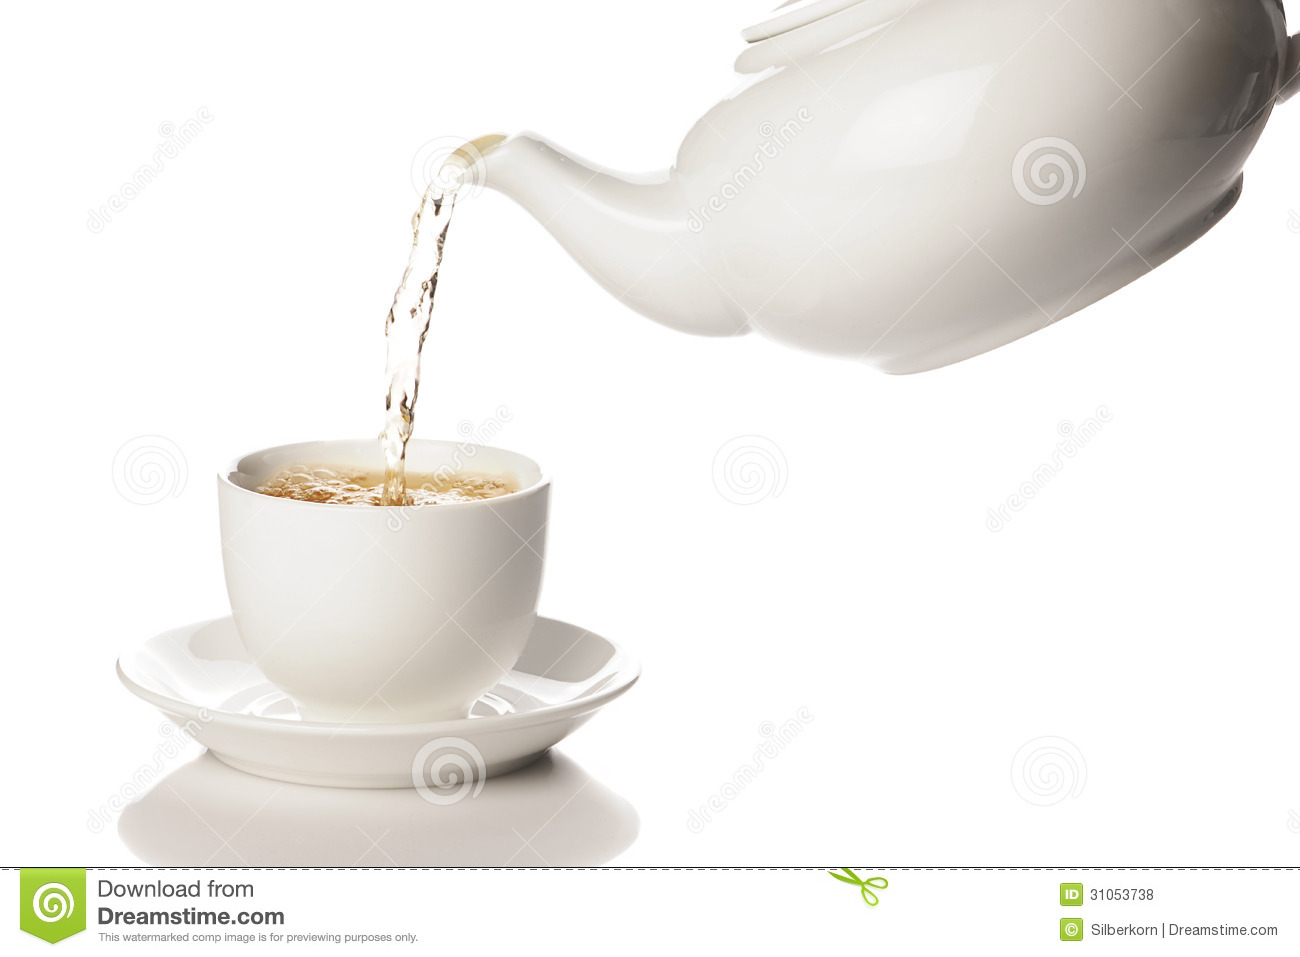 Pouring Green Tea From A White Teapot Into A Mug Royalty Free Stock